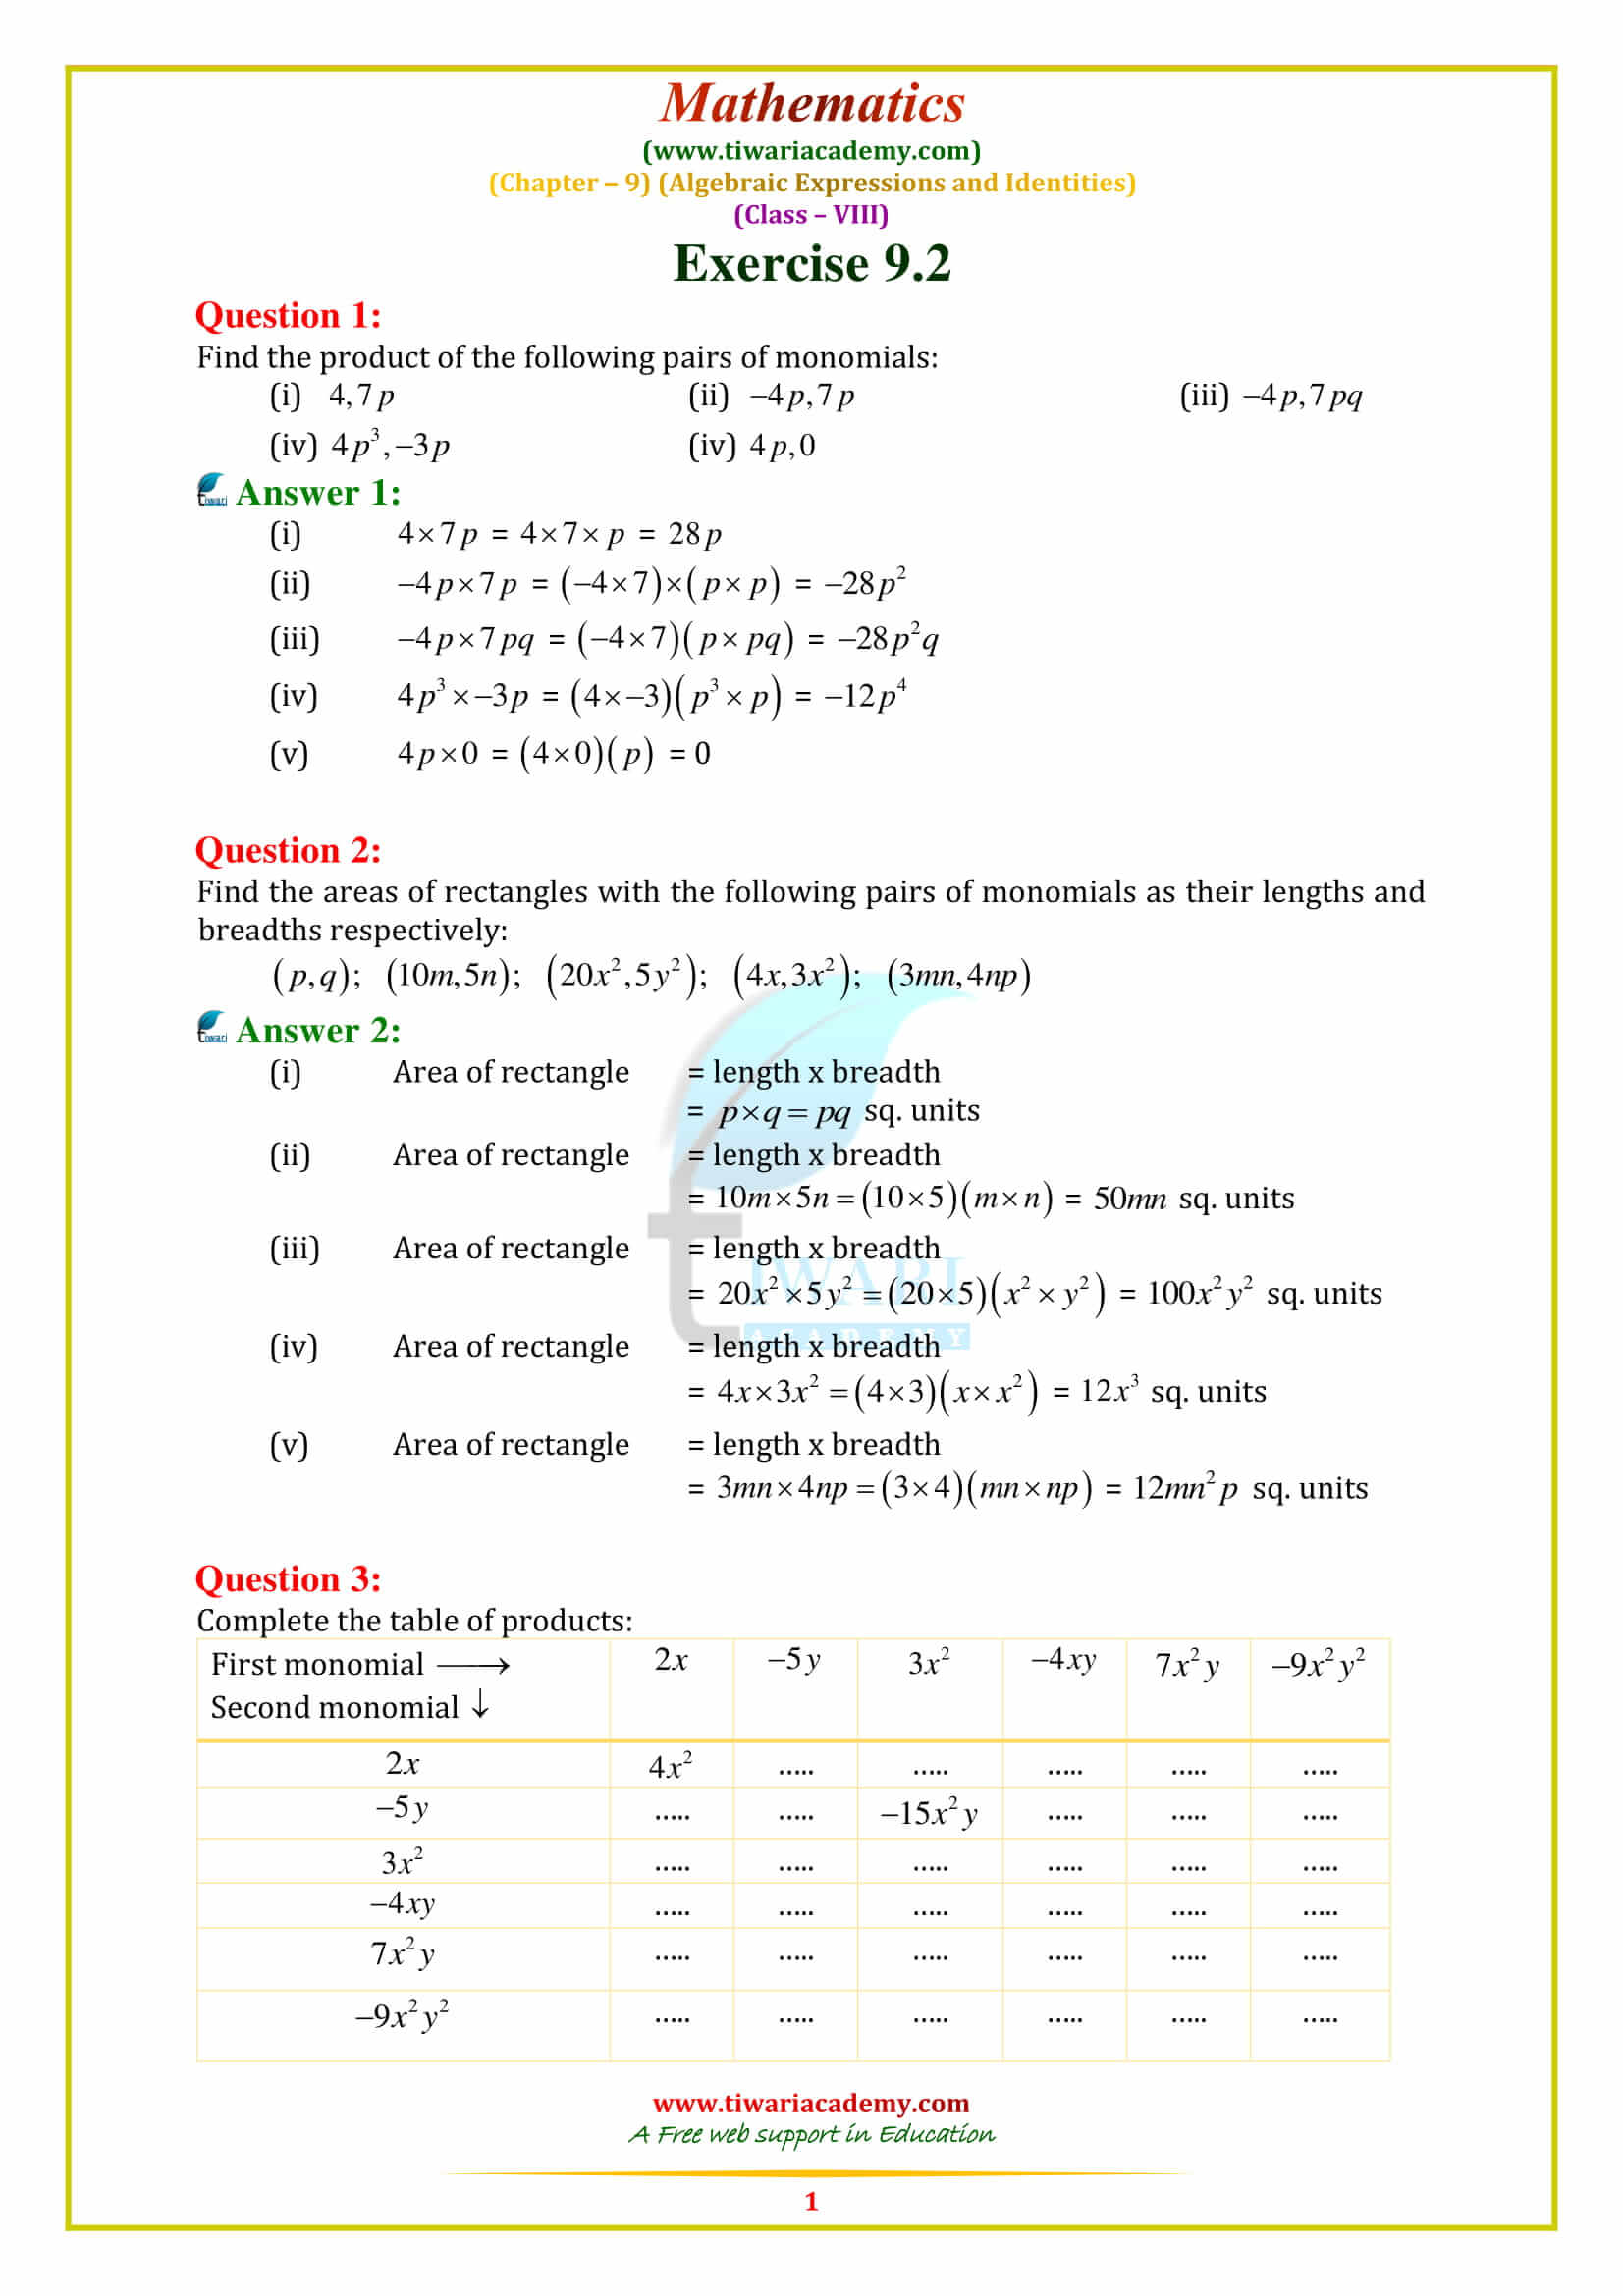 NCERT Solutions for Class 8 Maths Chapter 9 ALGEBRAIC EXPRESSIONS AND IDENTITIES exercise 9.2 in pdf